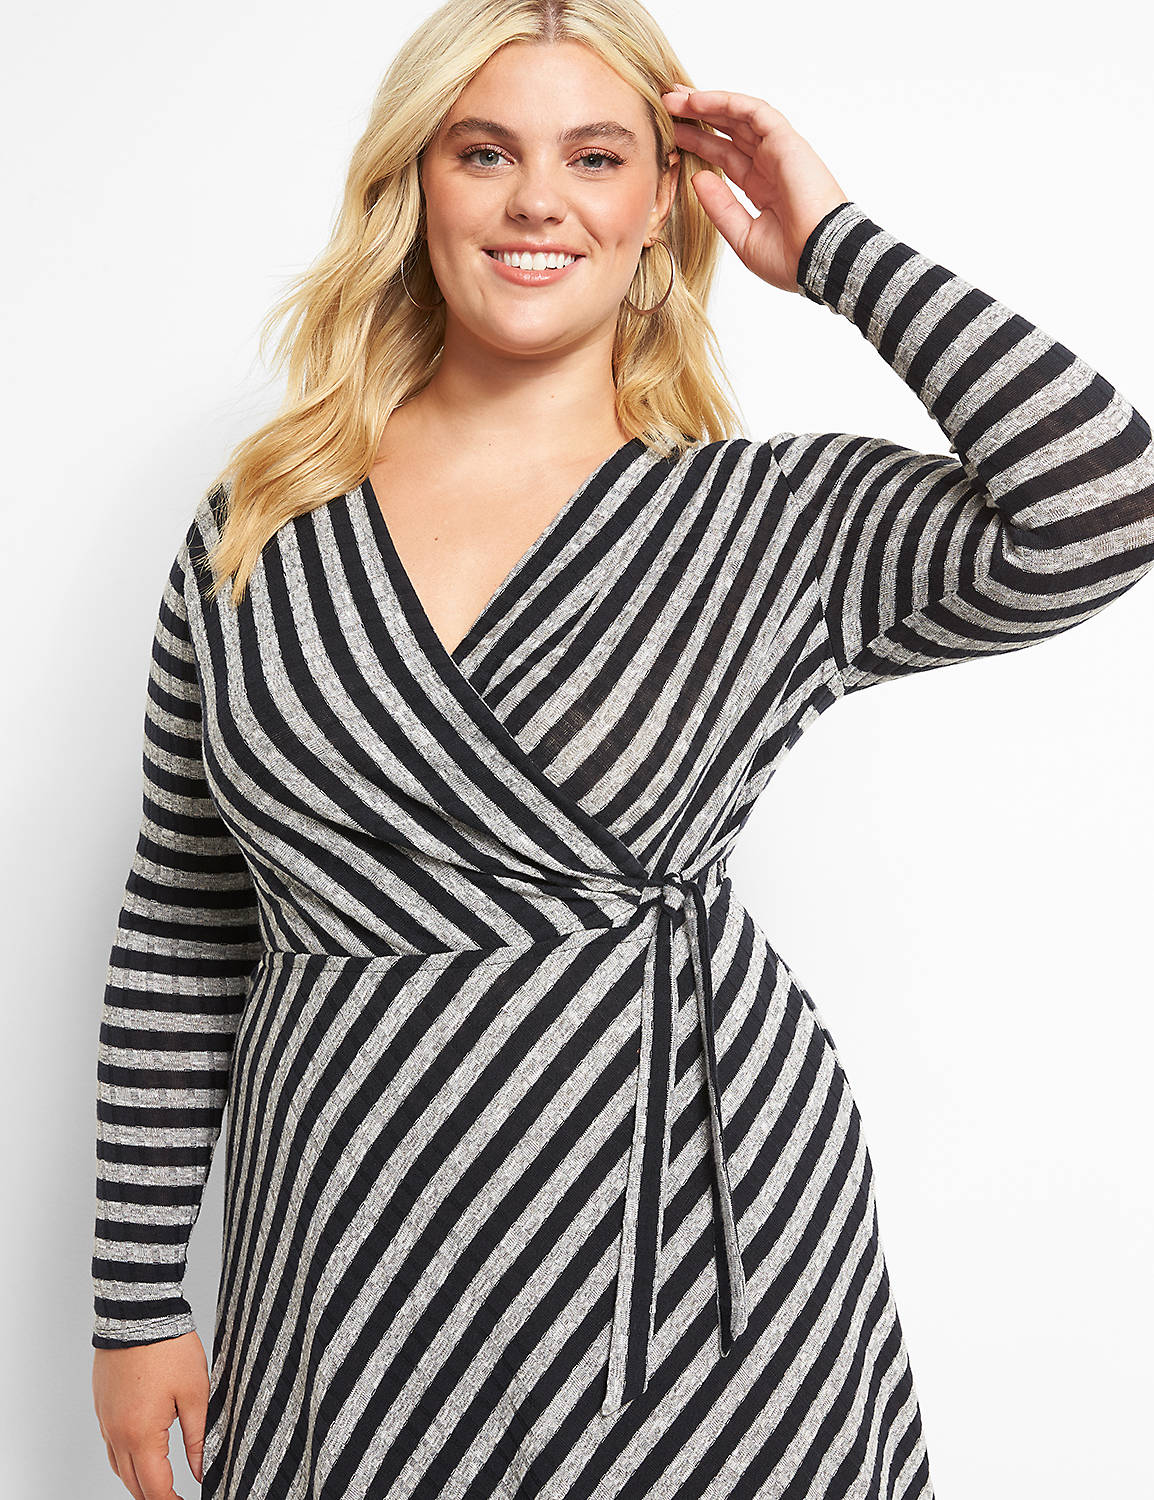 Long Sleeve Surplice Rib Fit and Flare 1122730:LBPS20153_BaileyStripe_colorway1:18/20 Product Image 3